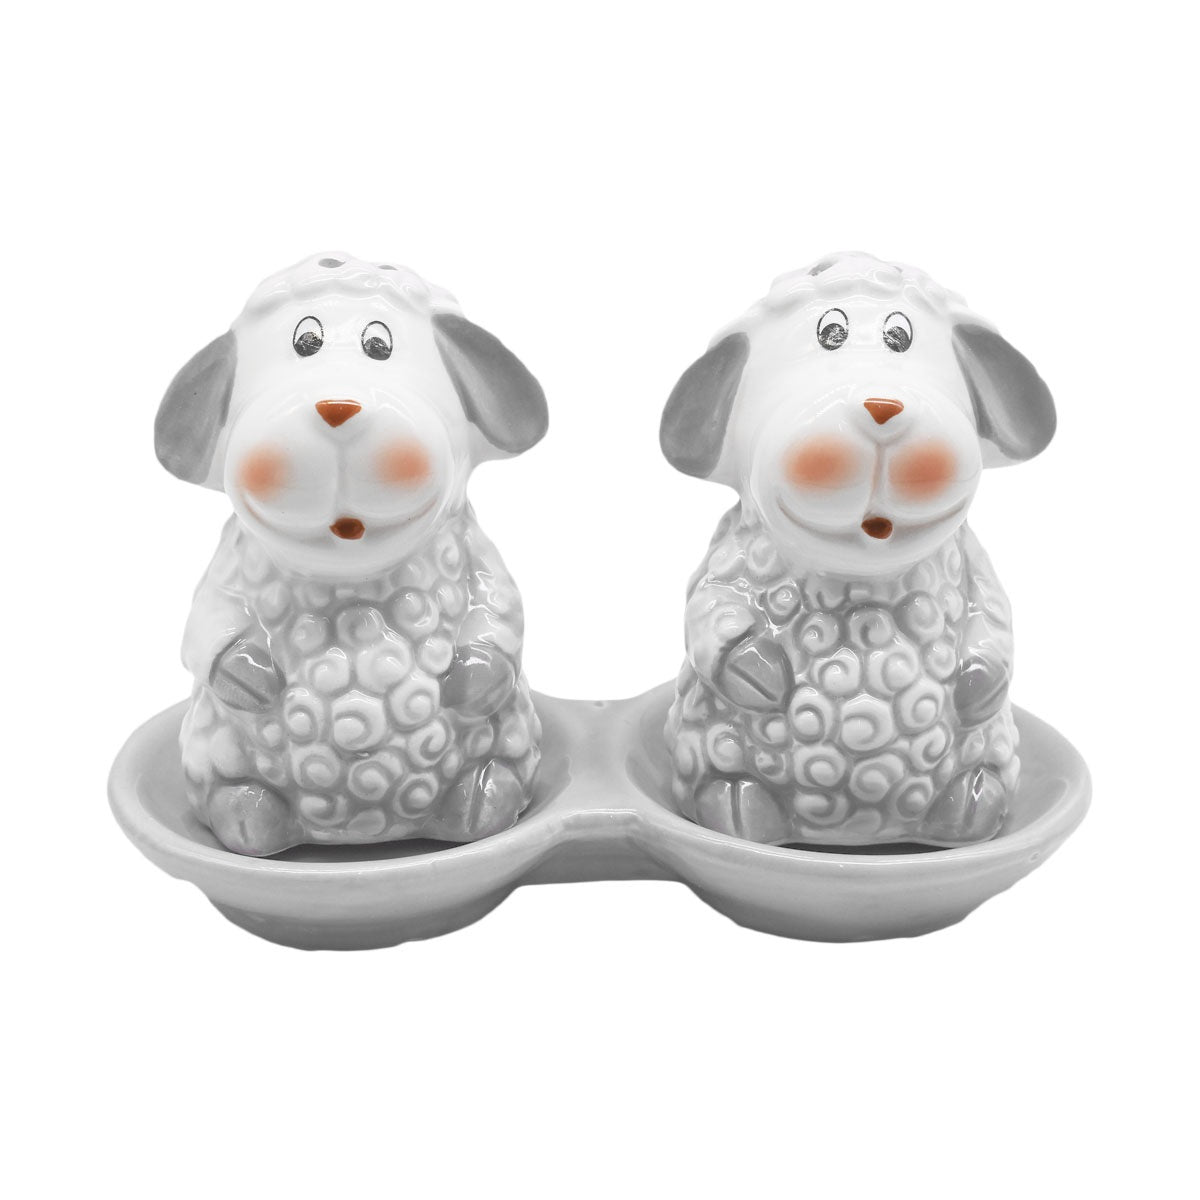 Kookee Ceramic Salt and Pepper Shakers Set with tray for Dining Table used as Namak Dhani, Shaker, Sprinkler, Spices Dispenser for Home, Kitchen and Restaurant, Sheep Design, Grey (8563)